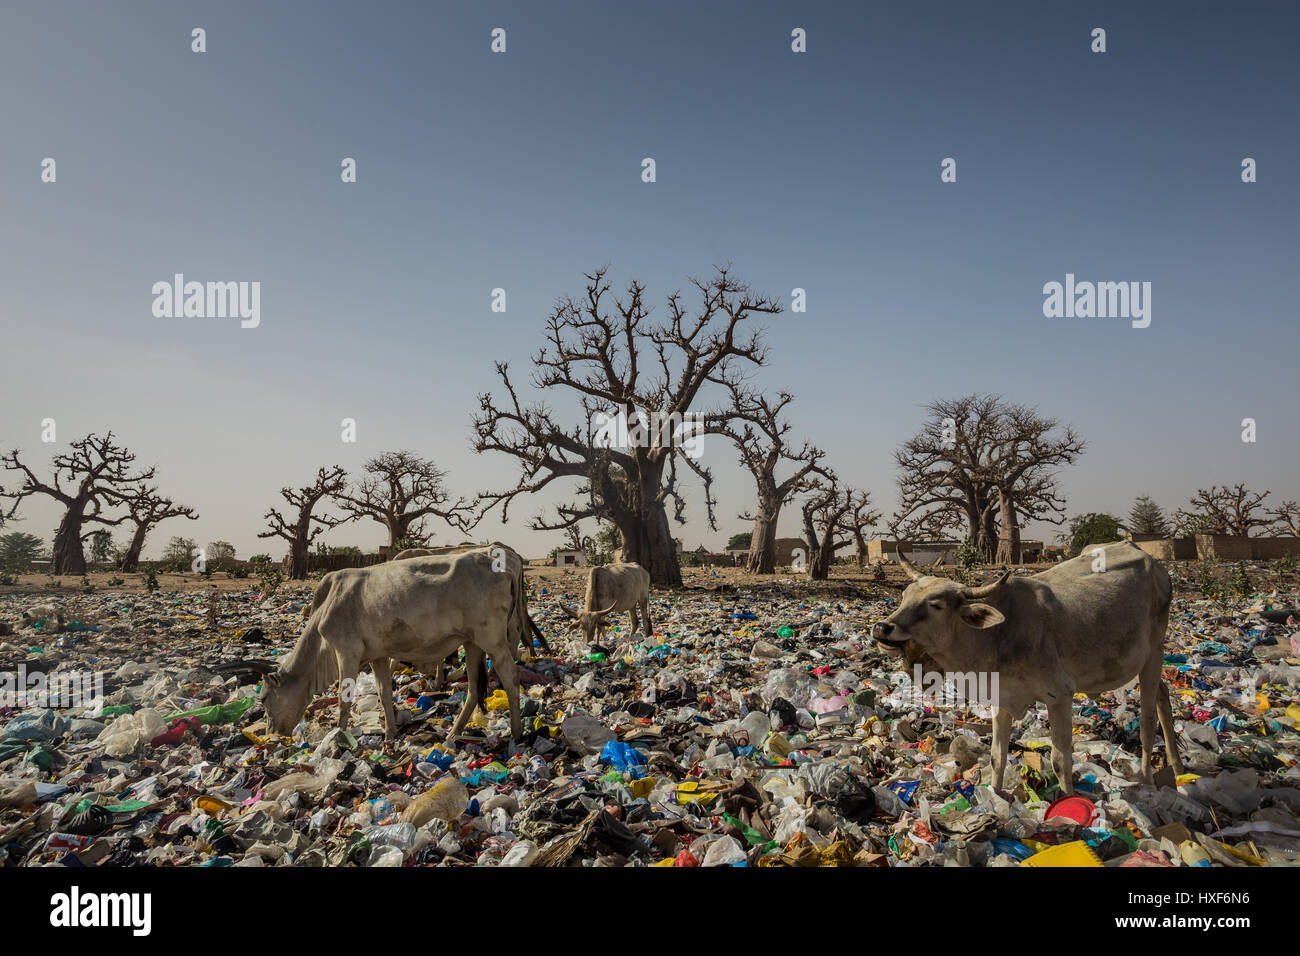 Cows are gazing on the land covered with plastic and paper garbage among the baobab trees Stock Photo